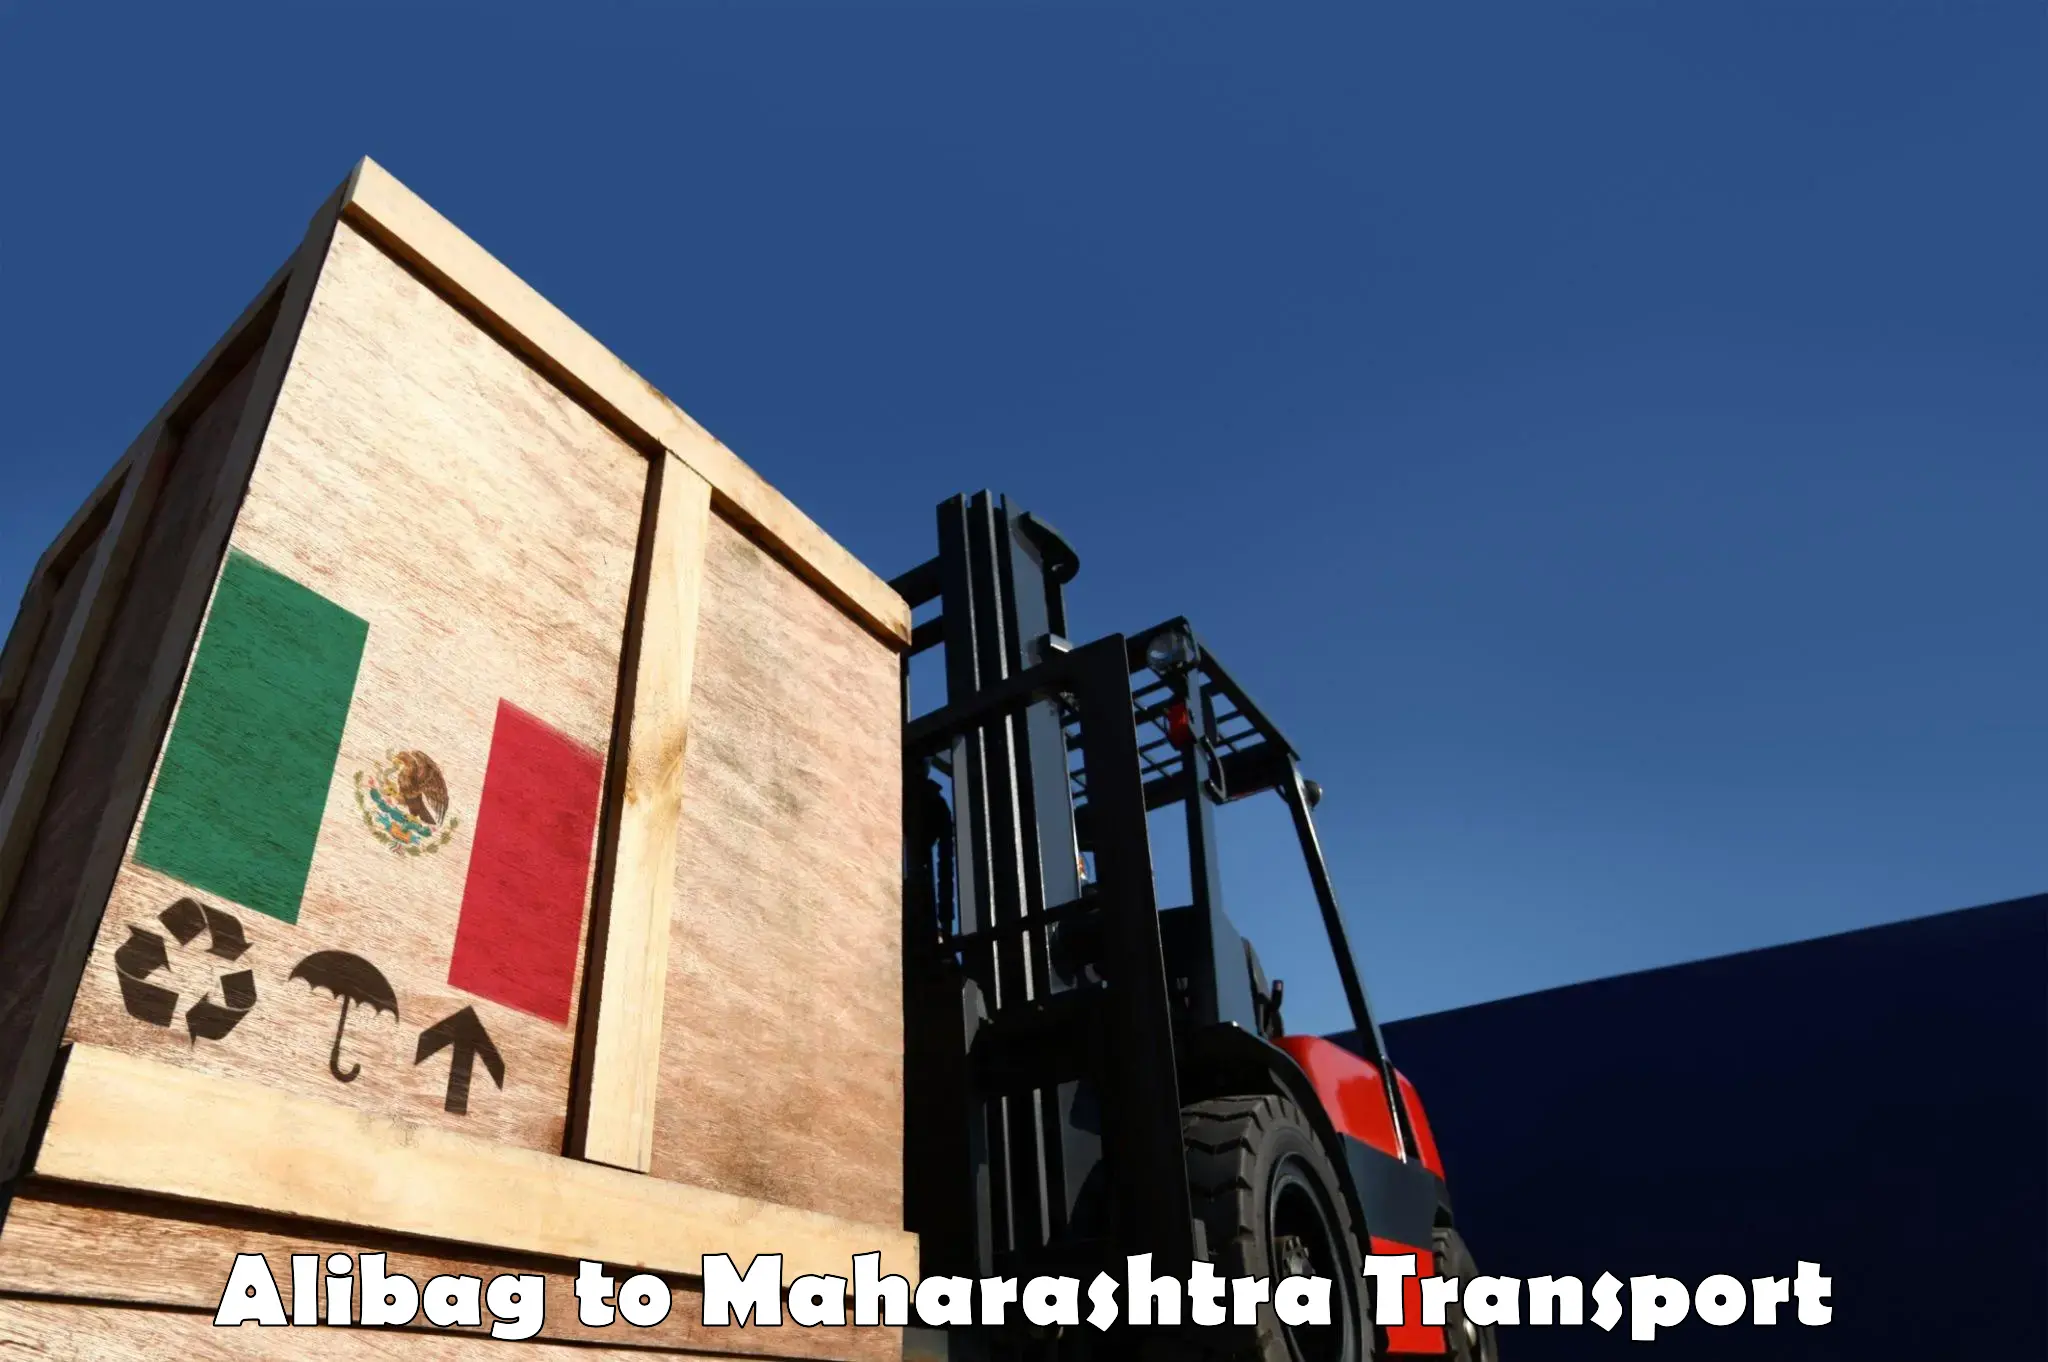 Land transport services in Alibag to Degloor